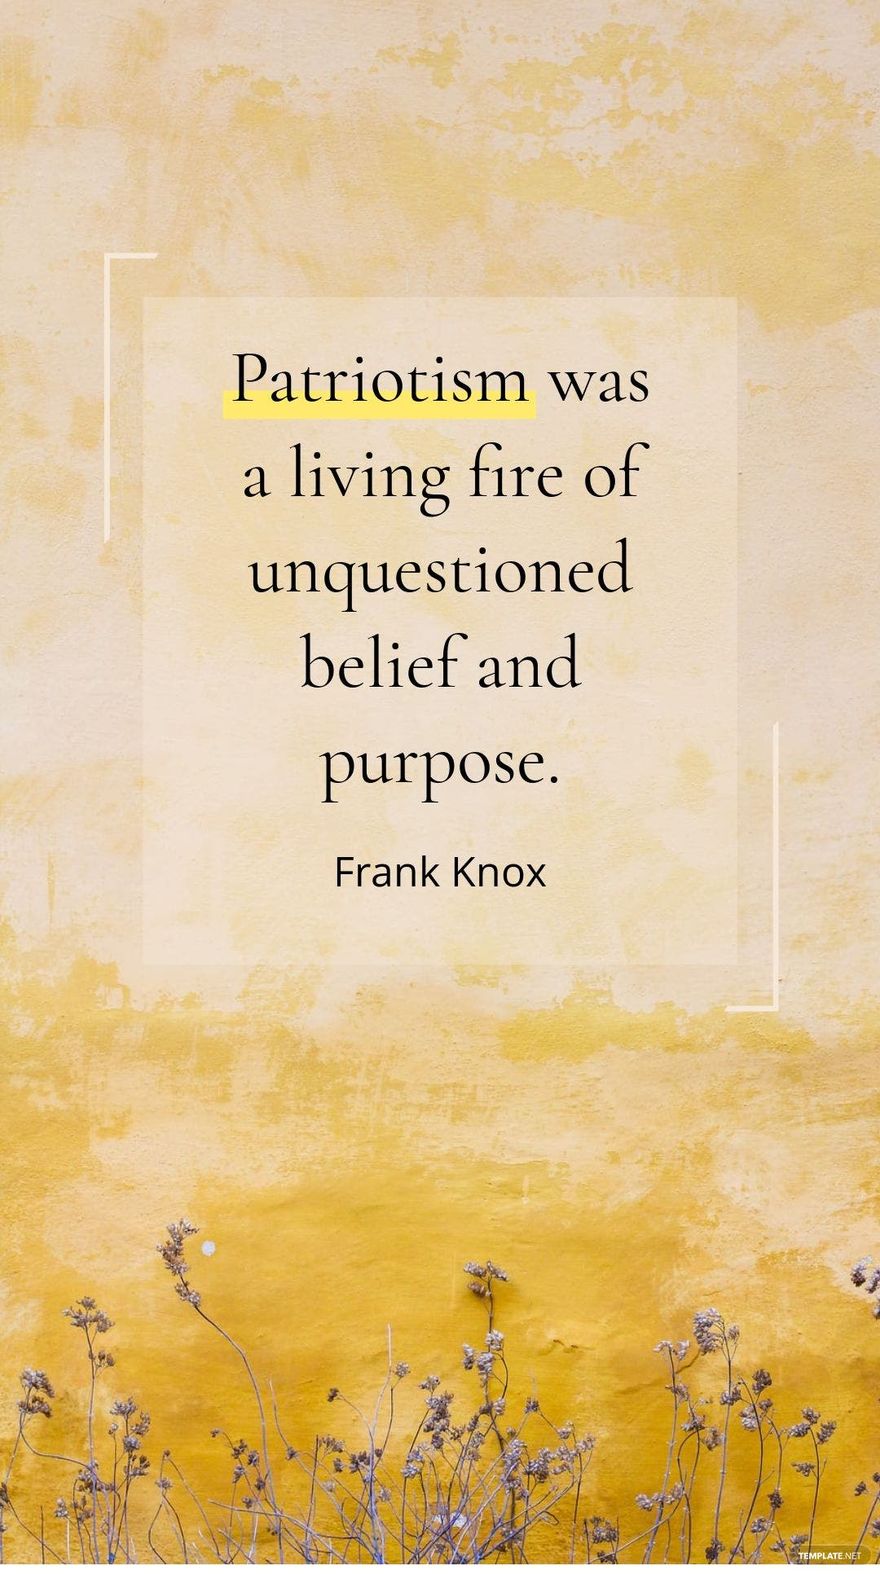 Frank Knox - Patriotism was a living fire of unquestioned belief and purpose. 